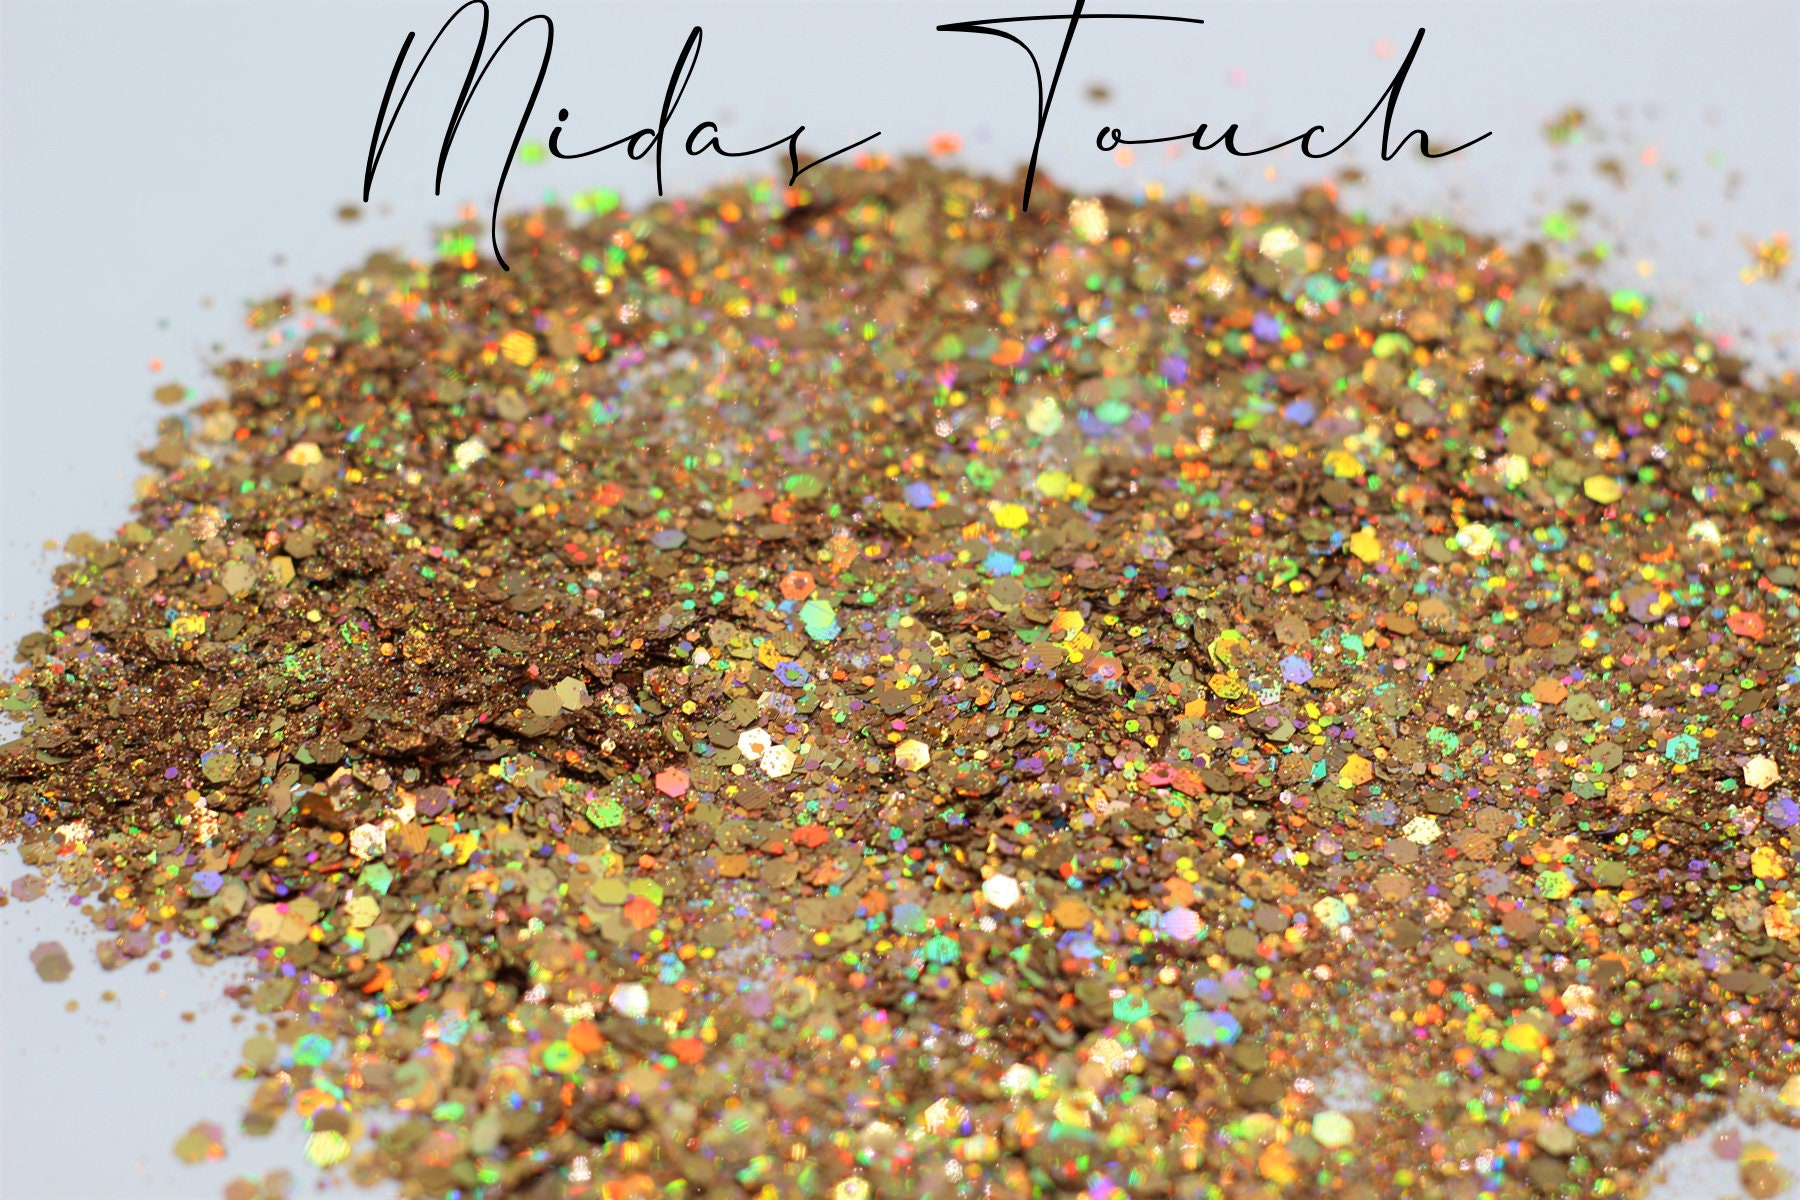 Pouch Of Midas Holographic Glitter Powder For Craft / Nail Art